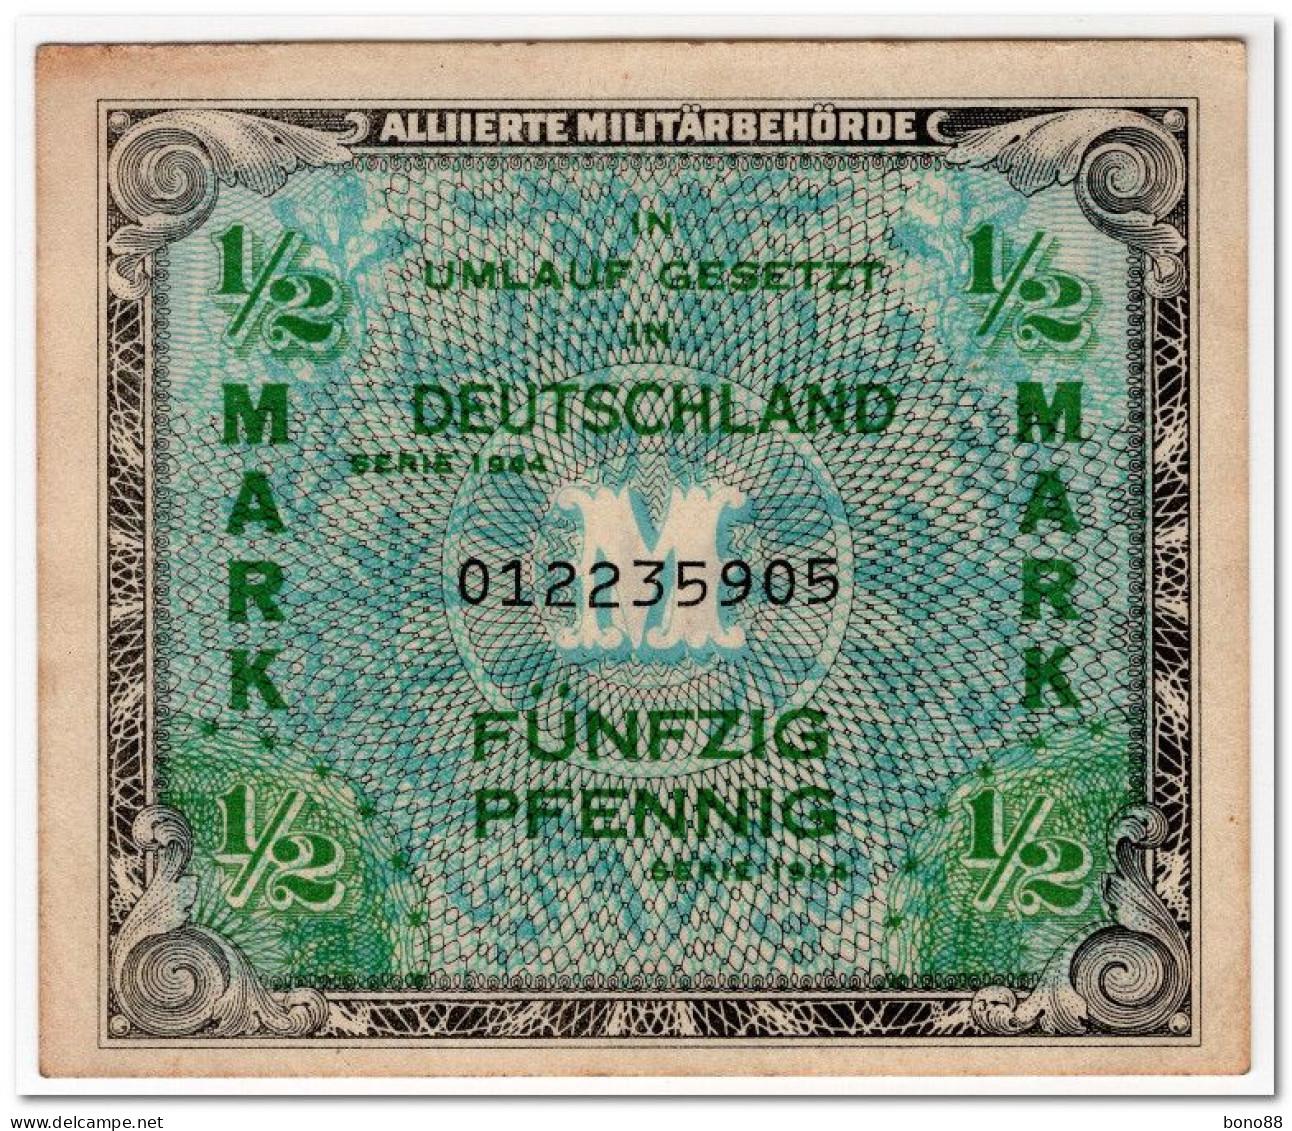 GERMANY,ALLIED OCCUPATION BANKNOTE ,1/2 MARK,1944,P.191,XF - 1/2 Mark